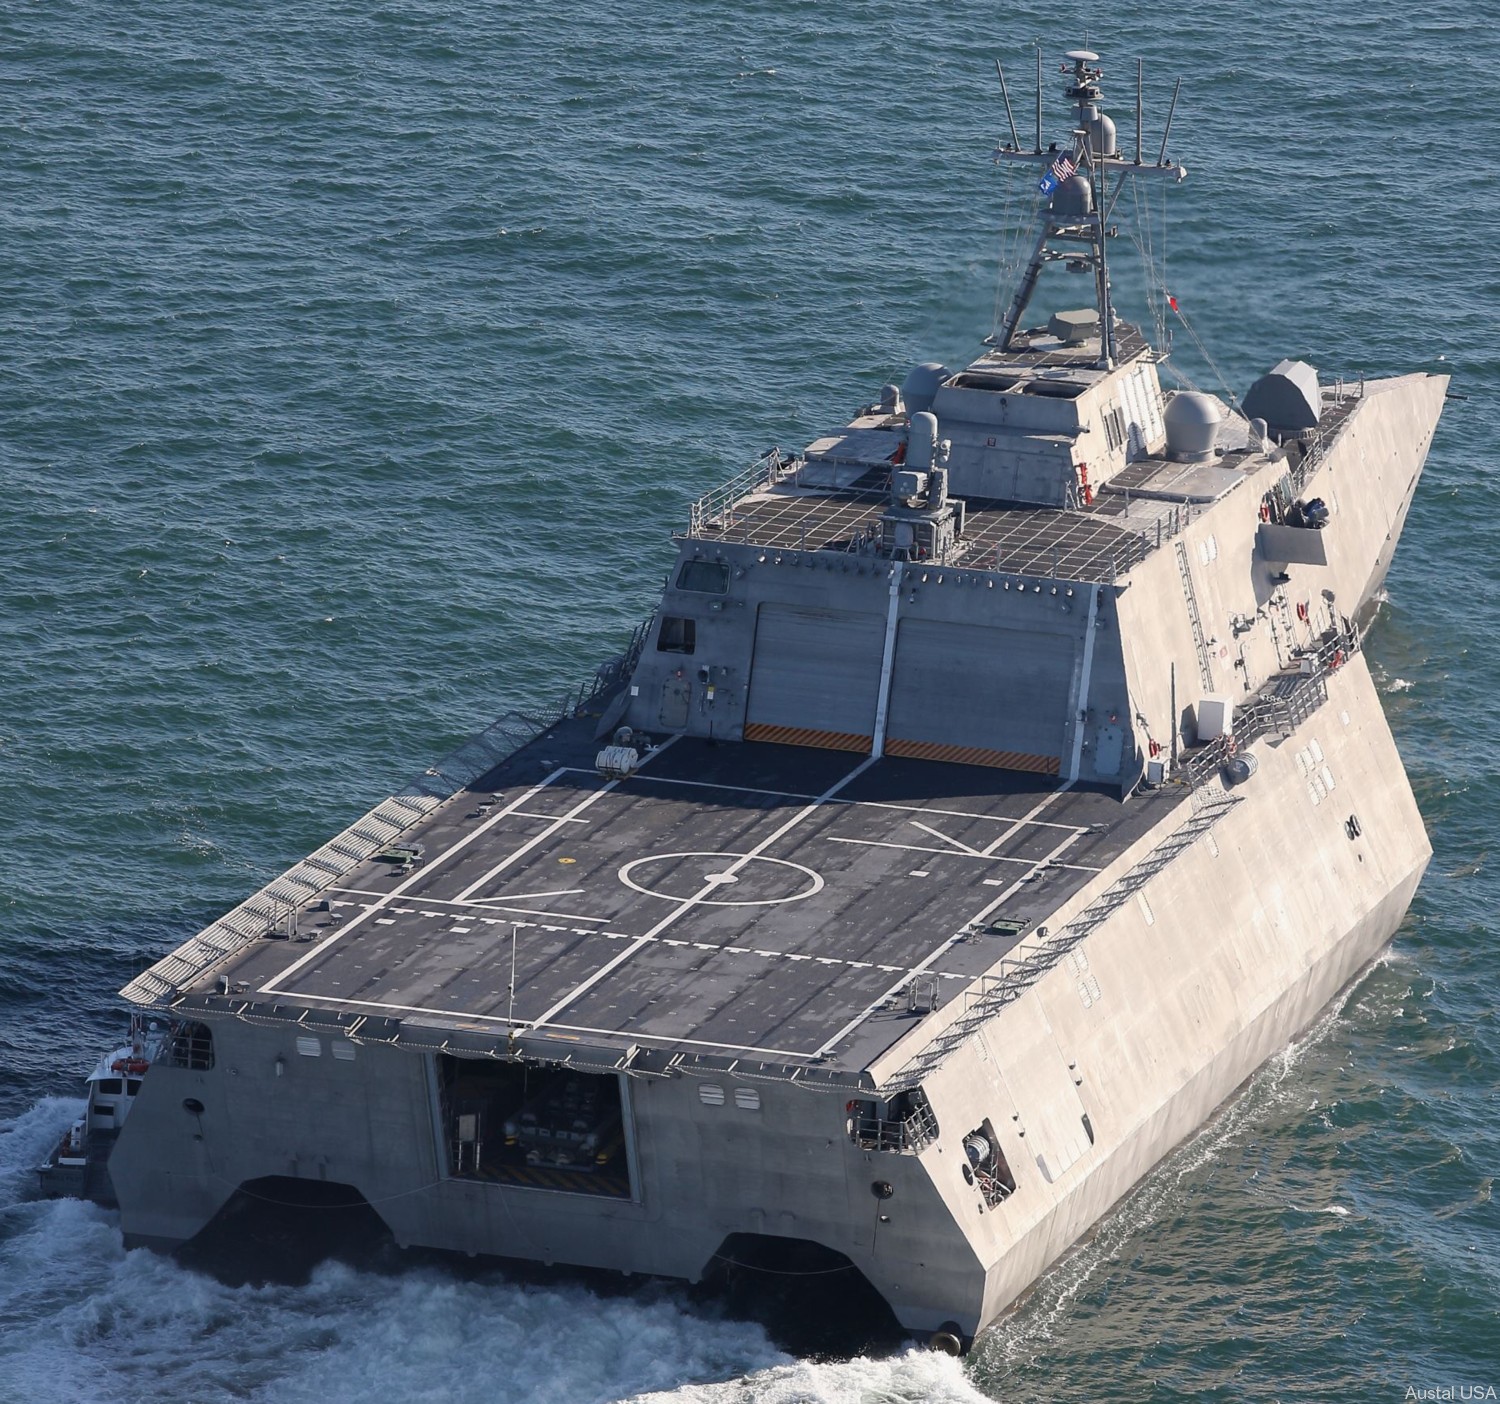 lcs-30 uss canberra littoral combat ship independence class us navy 03